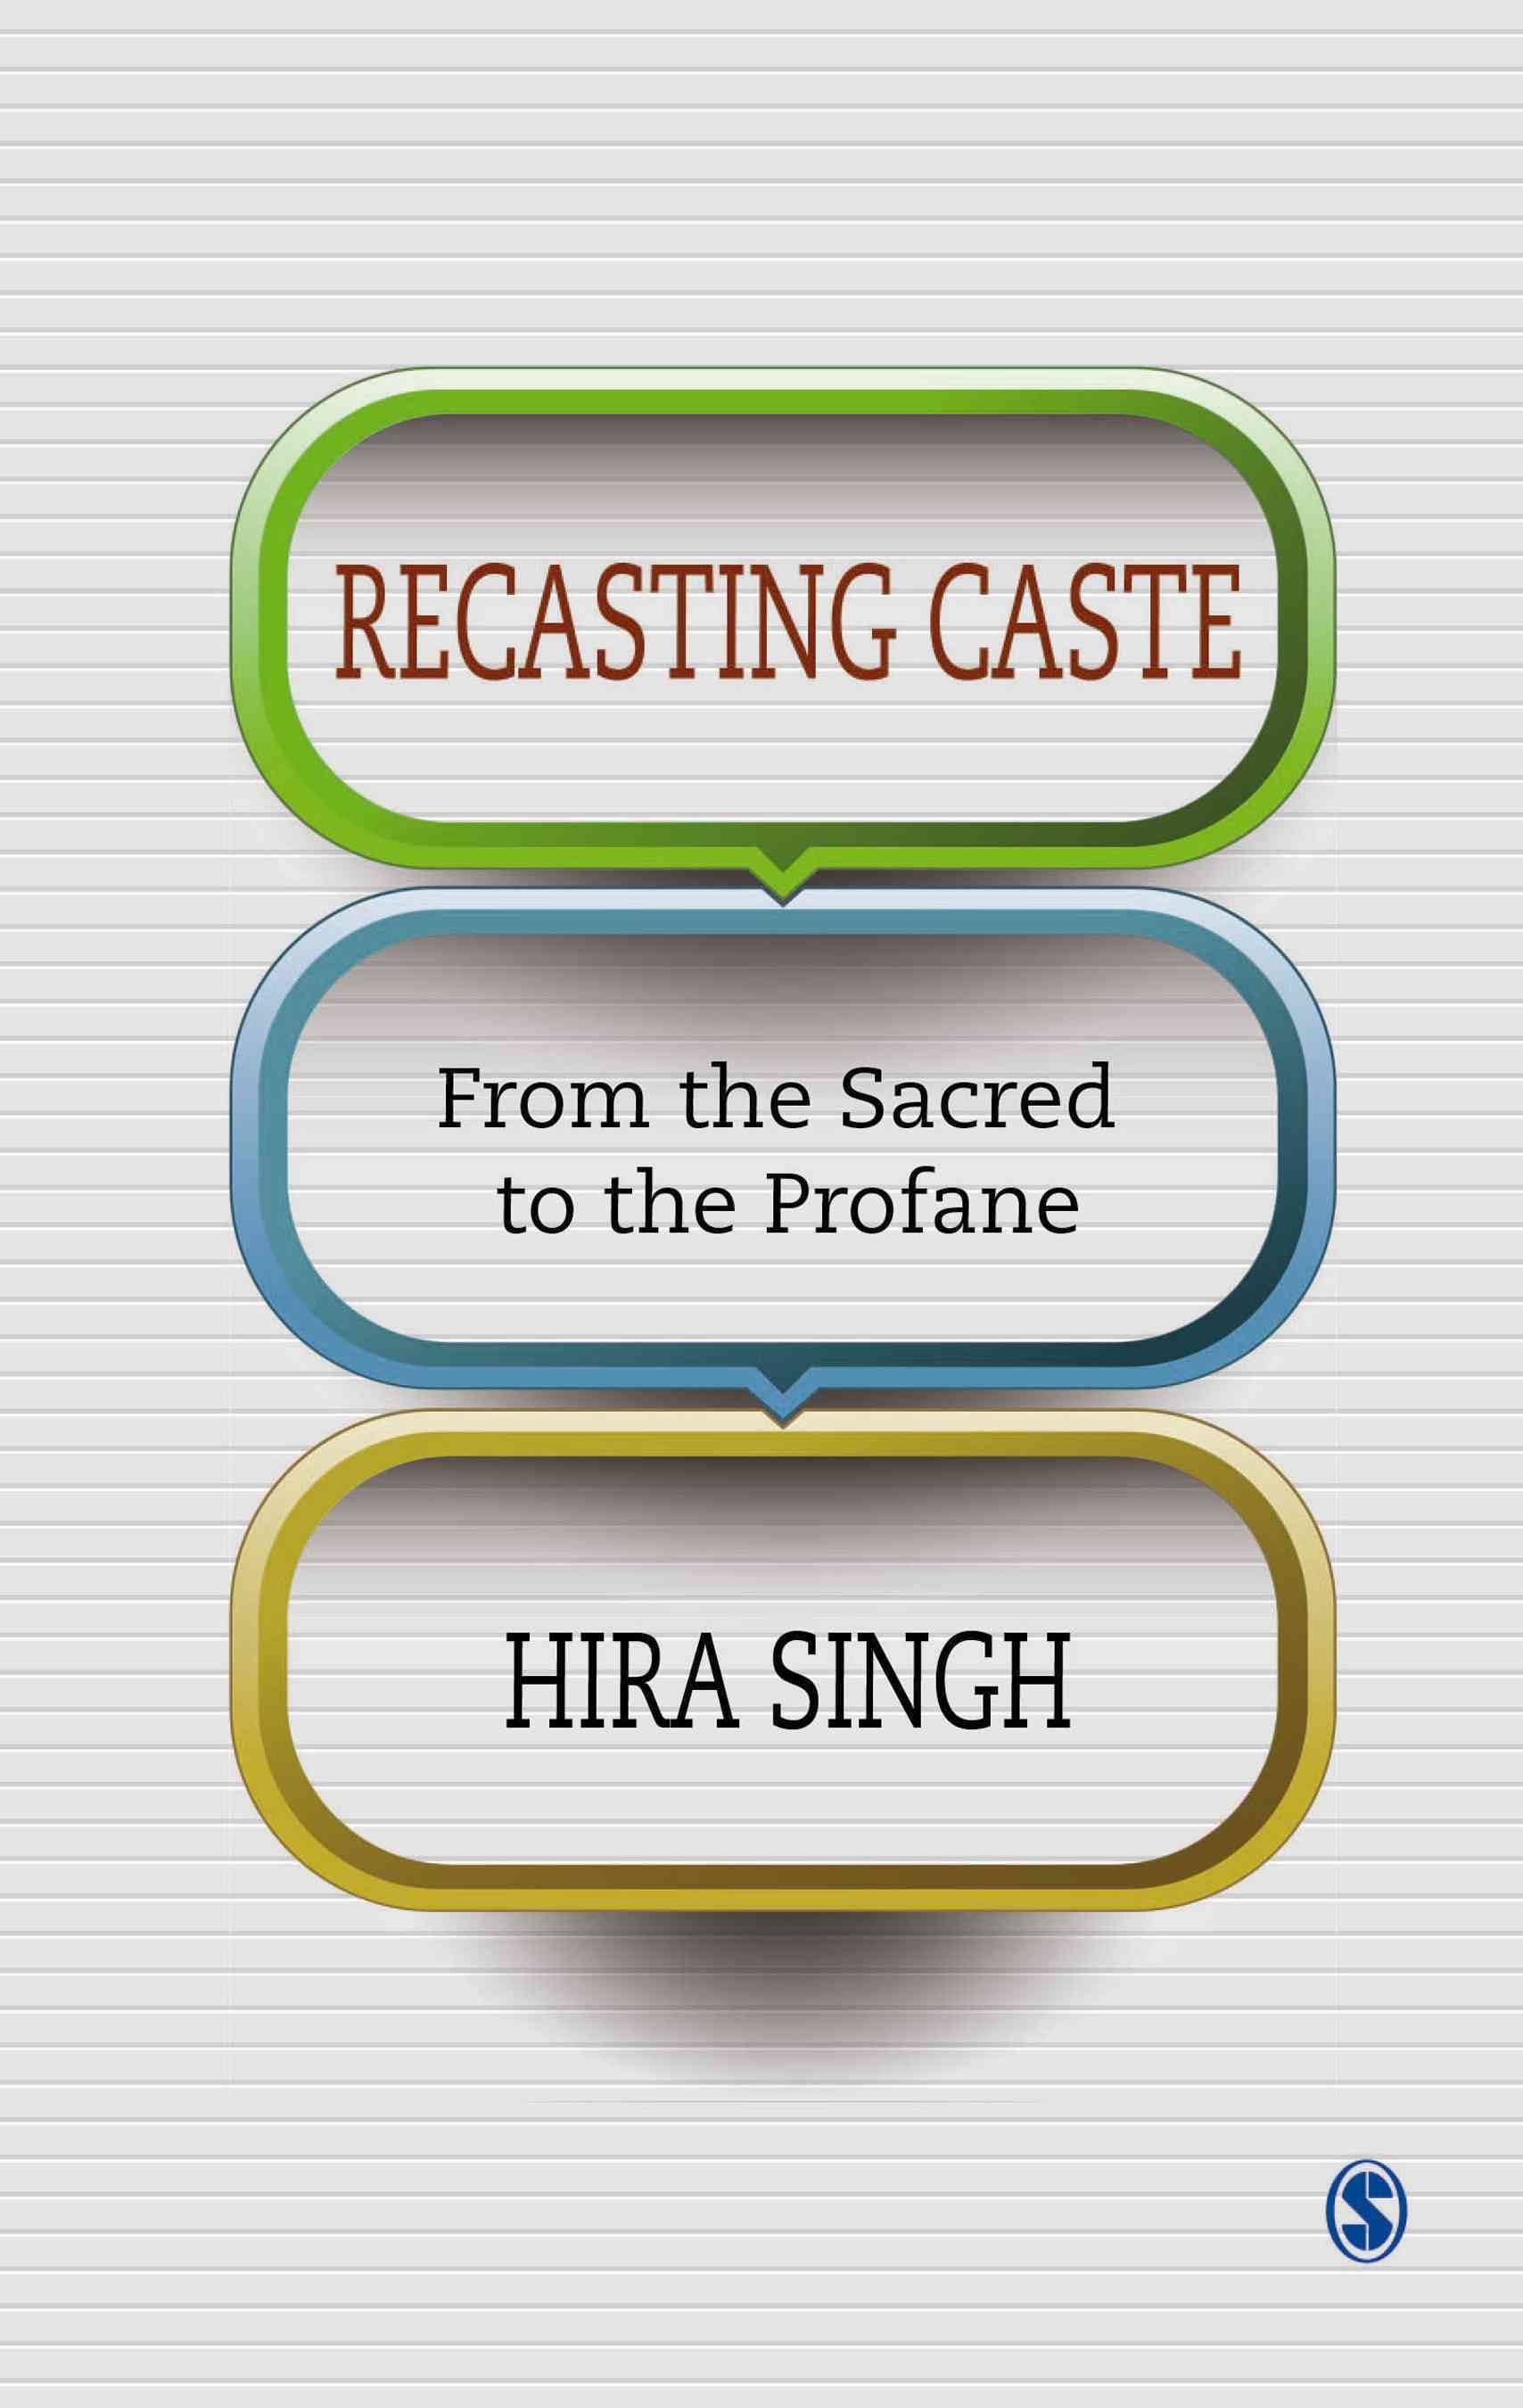 Recasting Caste: From the Sacred to the Profane